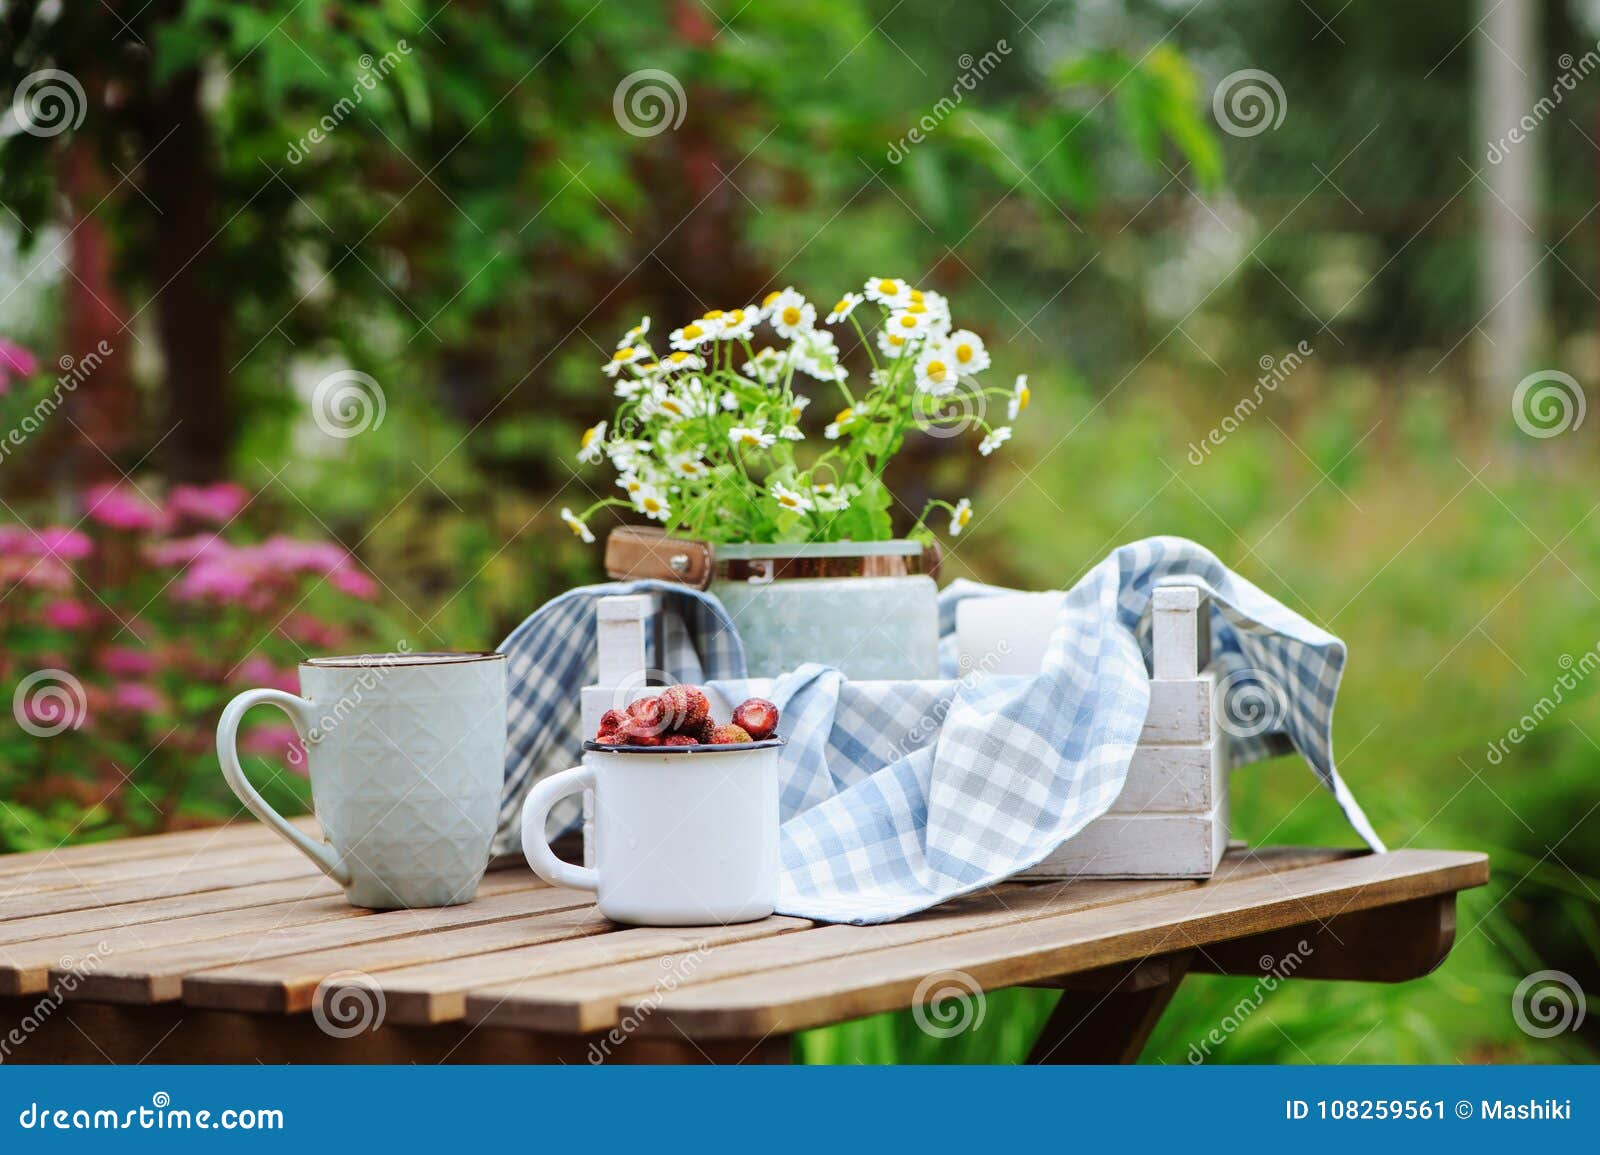 june or july garden scene with fresh picked organic wild strawberry and chamomile flowers on wooden table outdoor